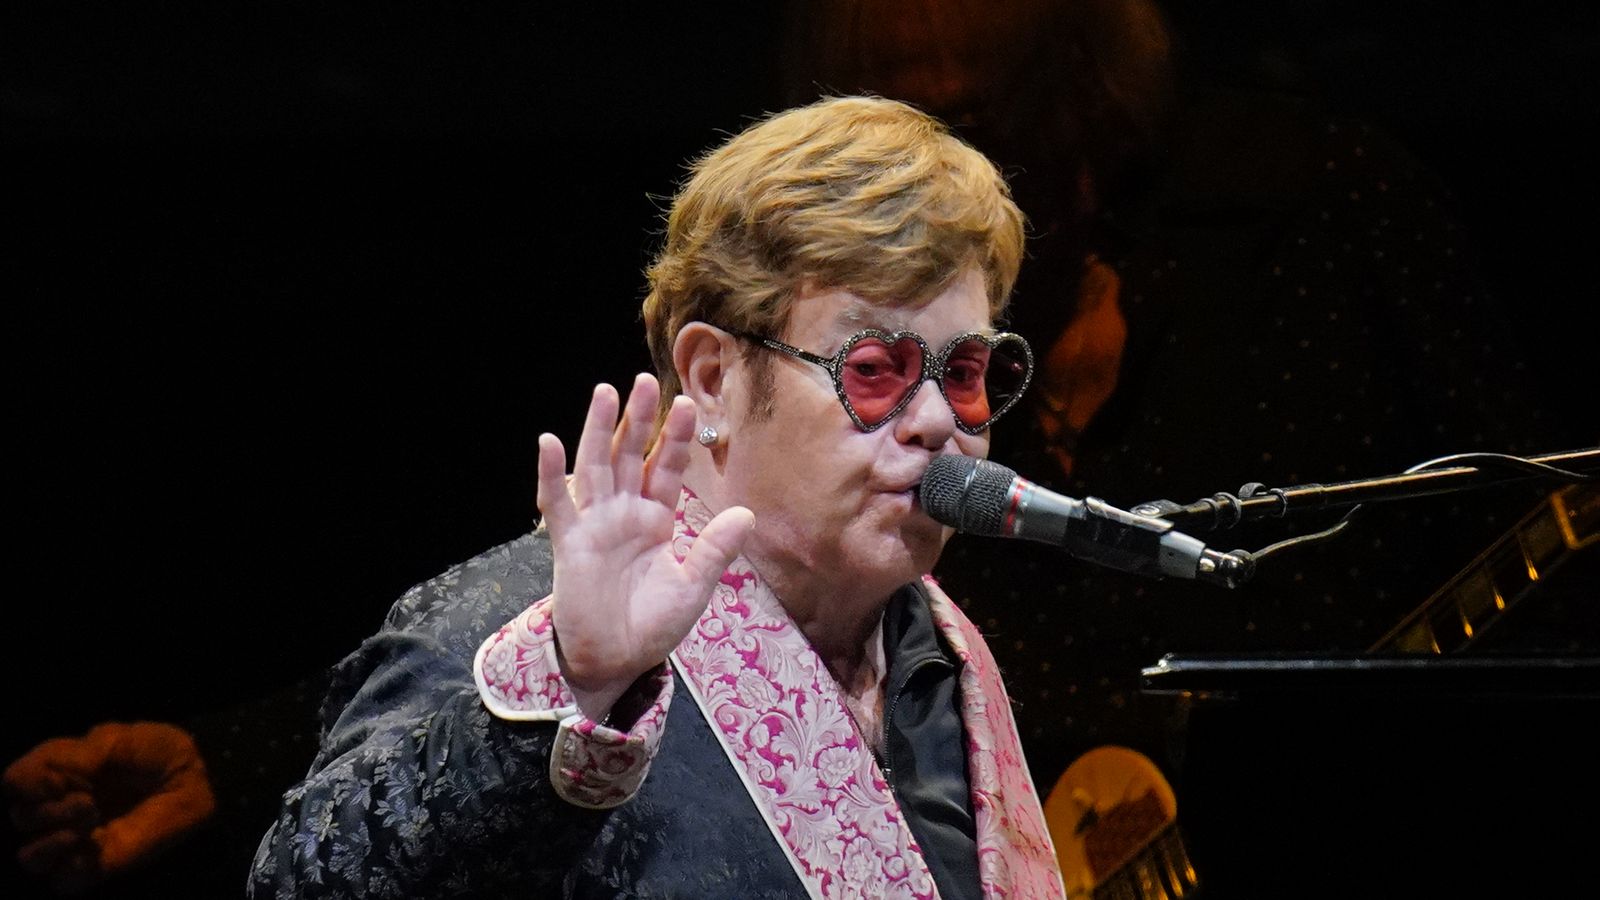 'I'm trying to process it': Sir Elton John thanks fans after 'magical' last night on tour